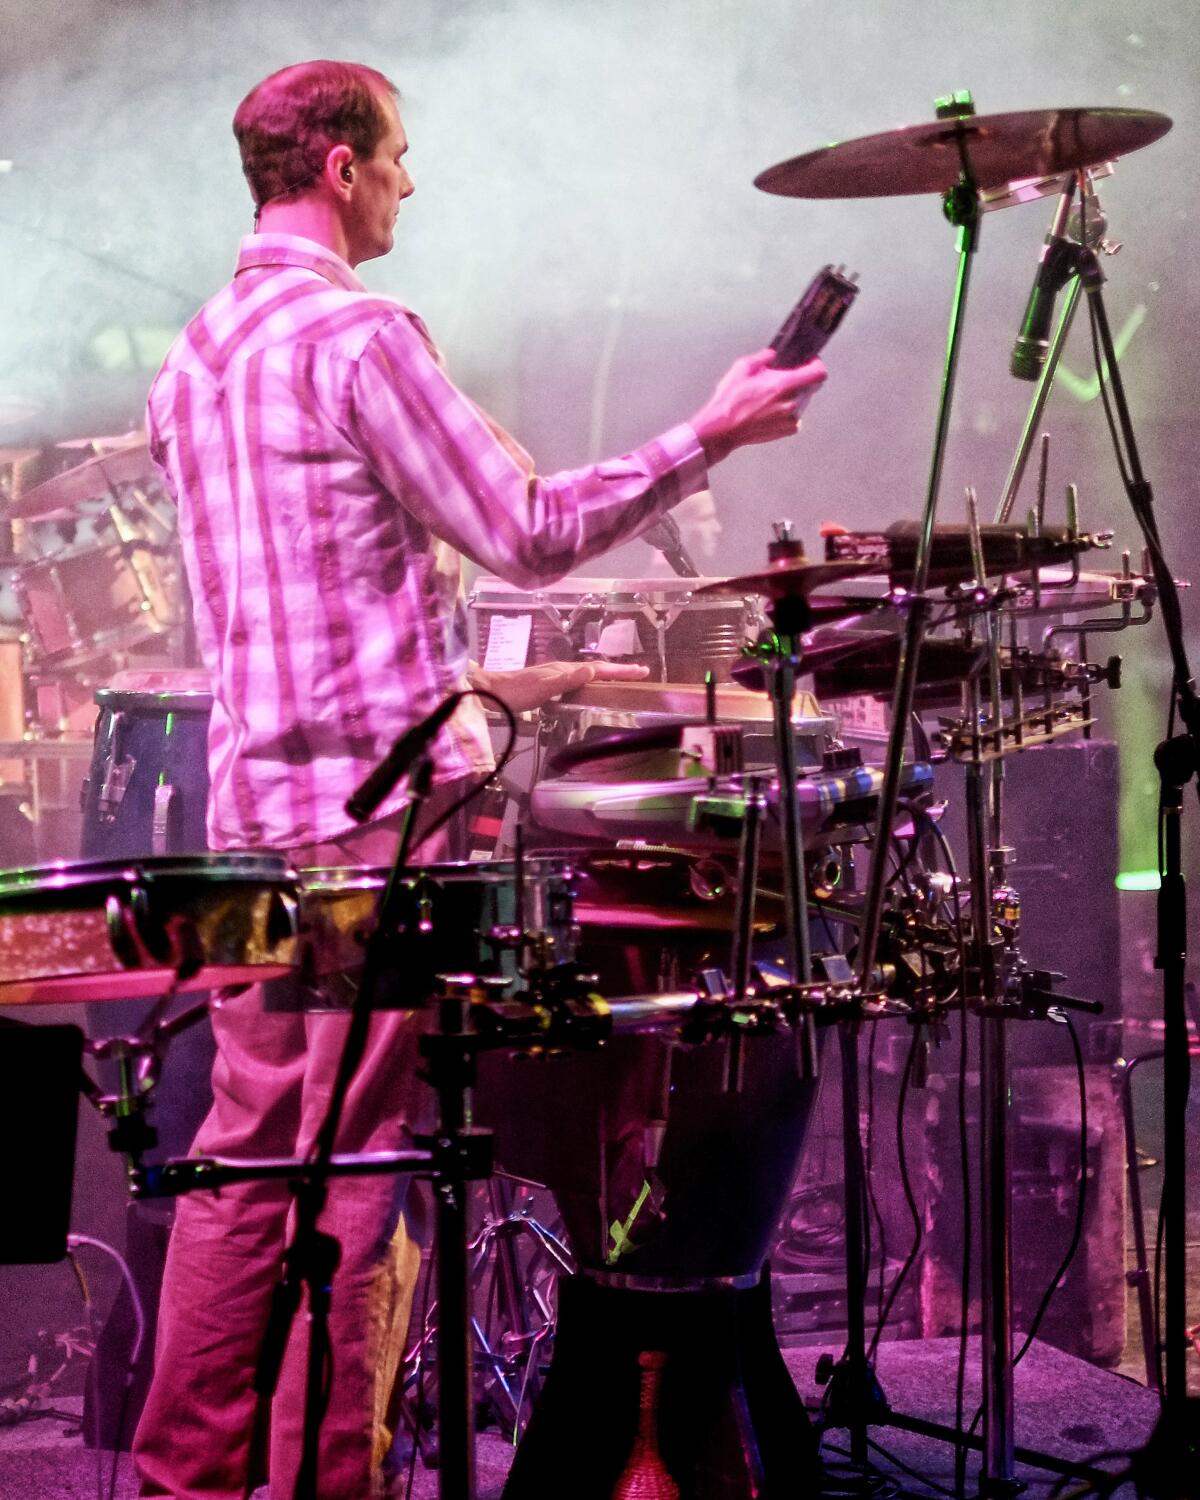 A person stand behind a drum set.